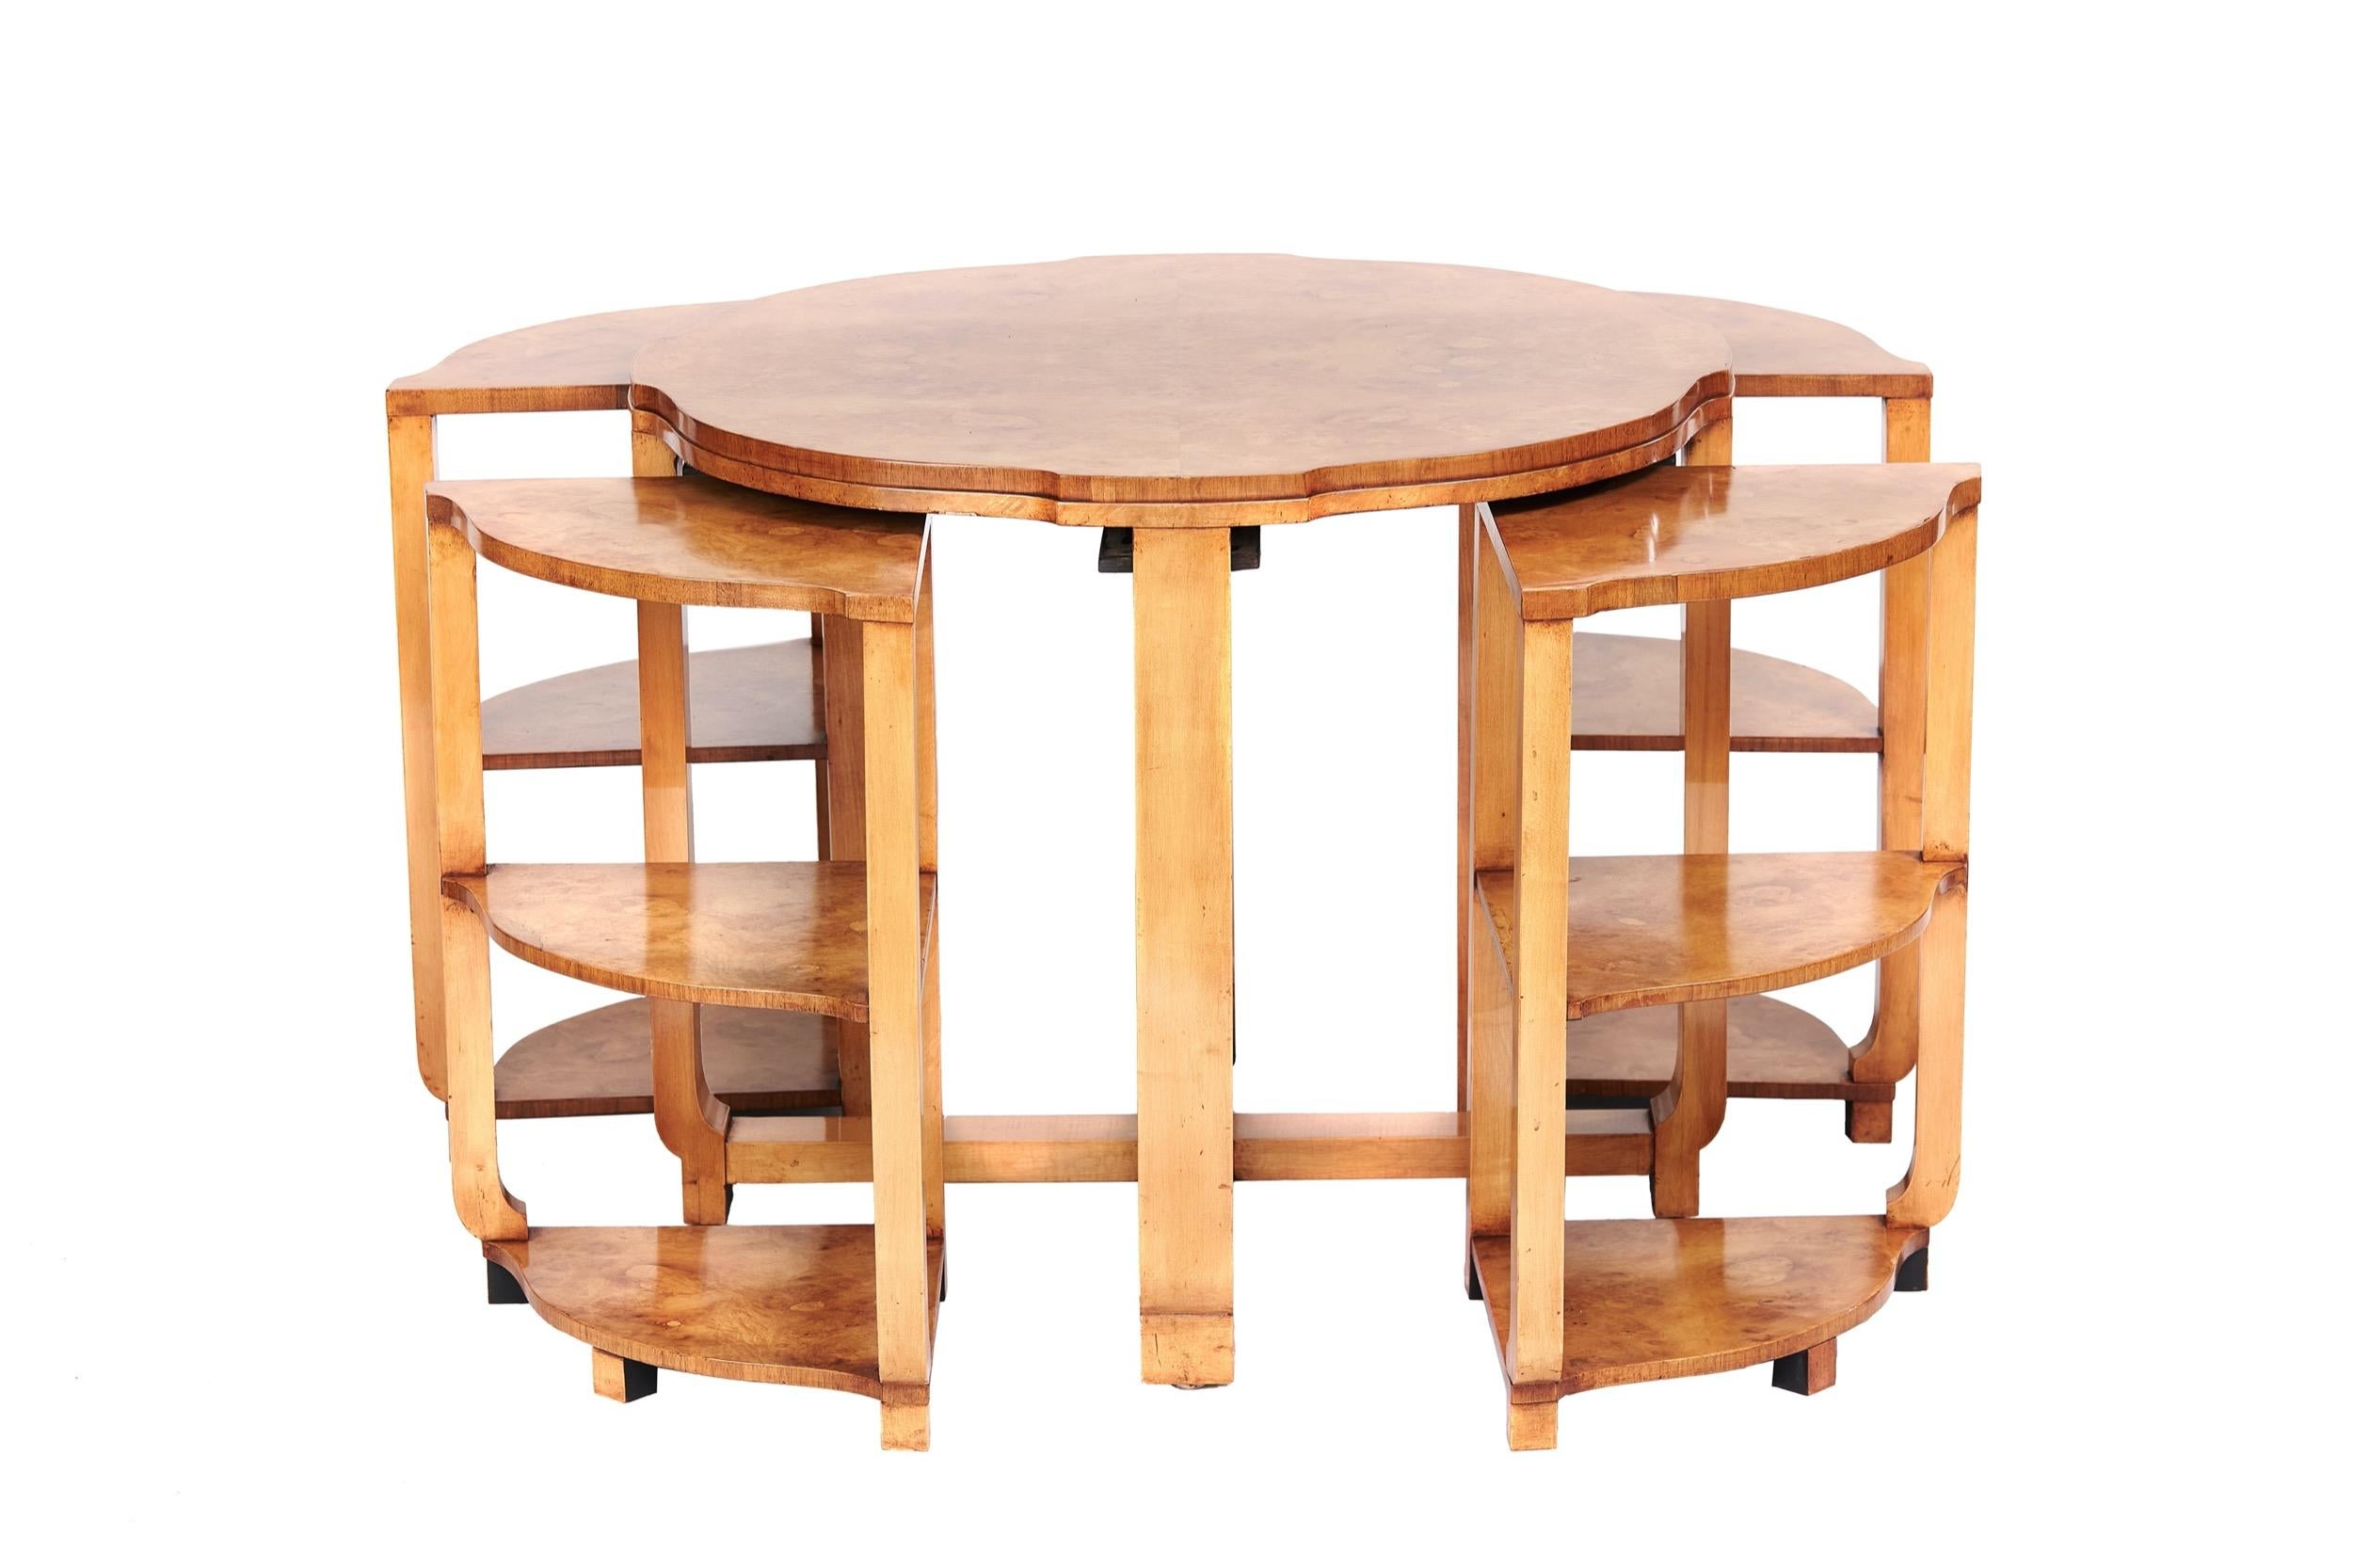 Fine Art Deco Nest 4 Tables with Burr Walnut Tops, circa 1920s
Shaped circular top with burr Walnut veneer, 
Nest 4 tables underneath, 
Each with 3 tiers & burr walnut tops, 
Slides under top to hold the 4 nests, 
Good quality tables, 
Recently